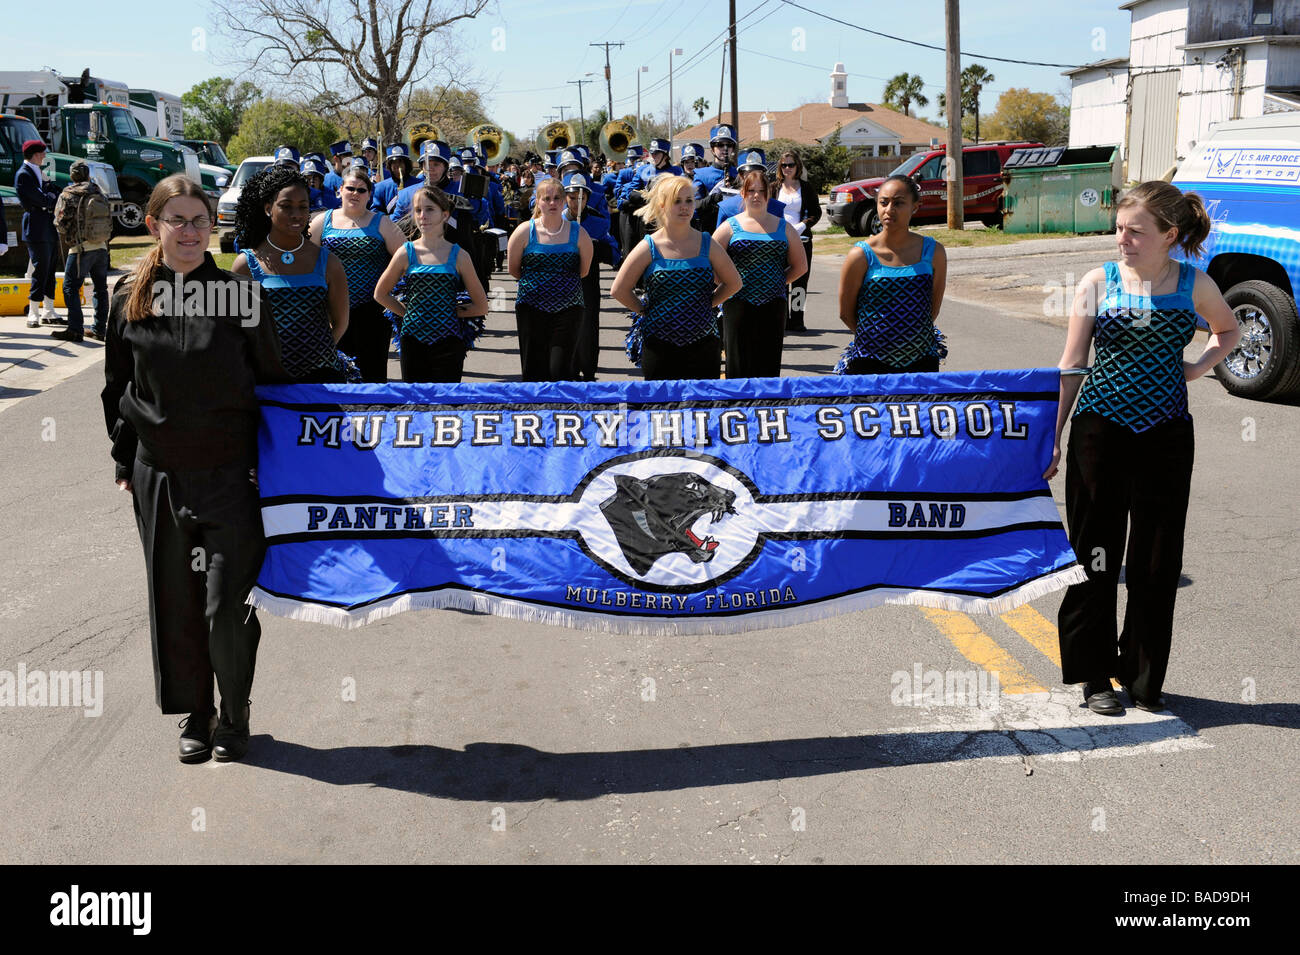 High School Band Banner at Strawberry Festival Parade Plant City Florida Stock Photo